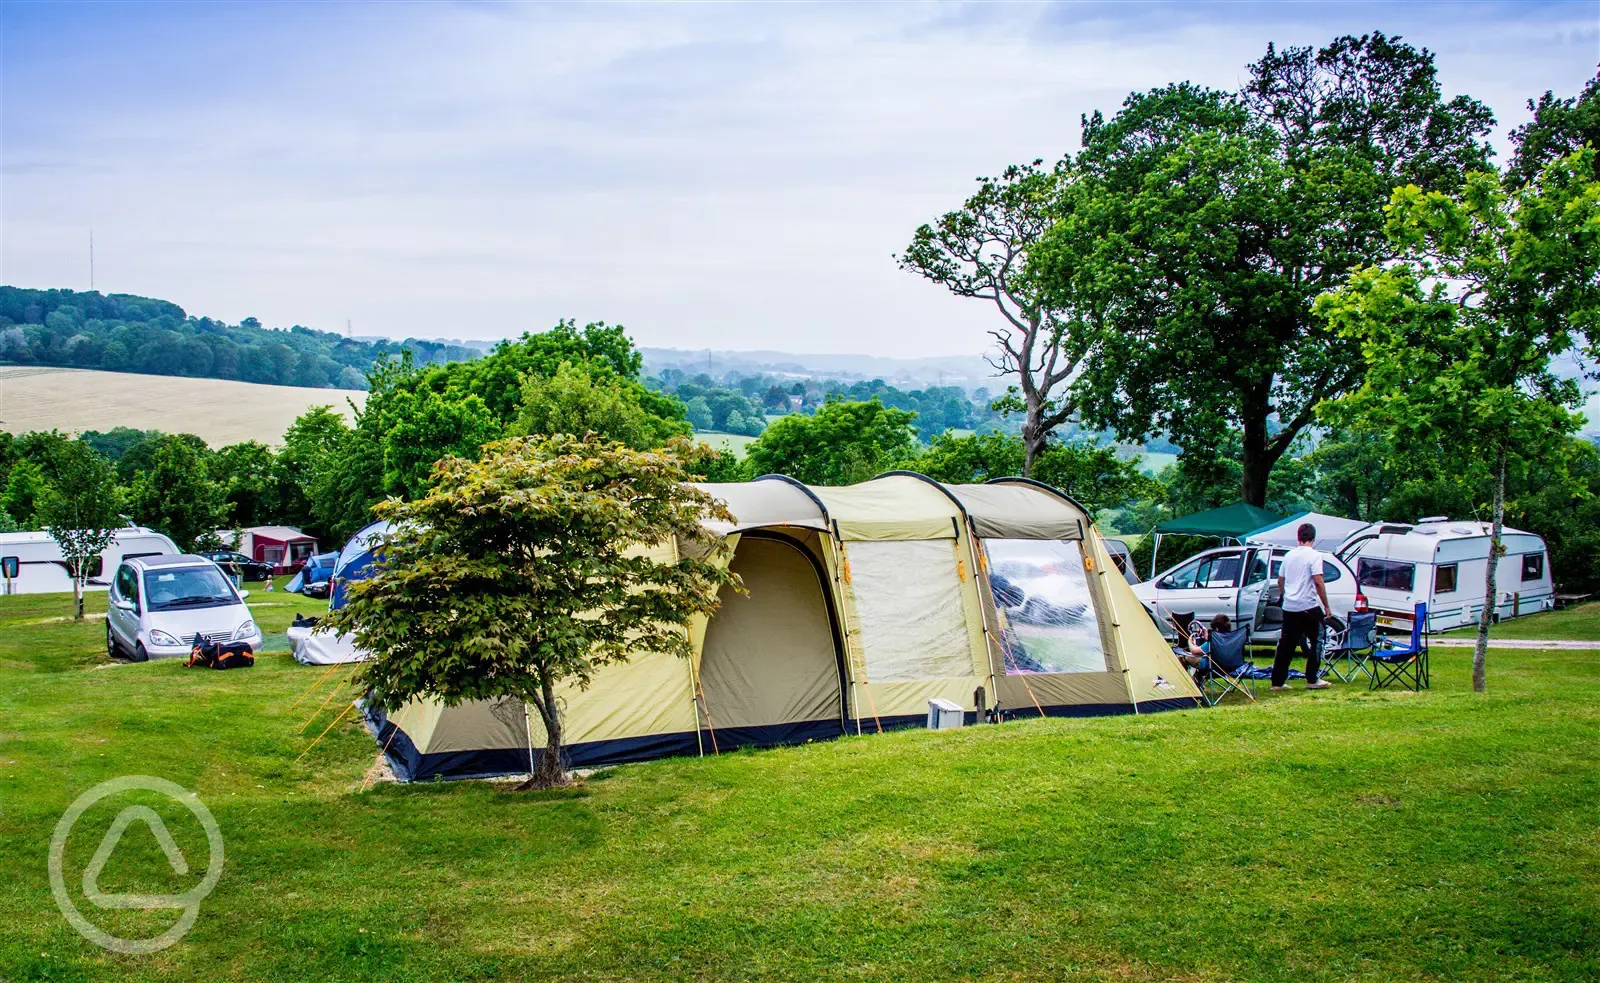 Camping at Andrewshayes on terraced pitches